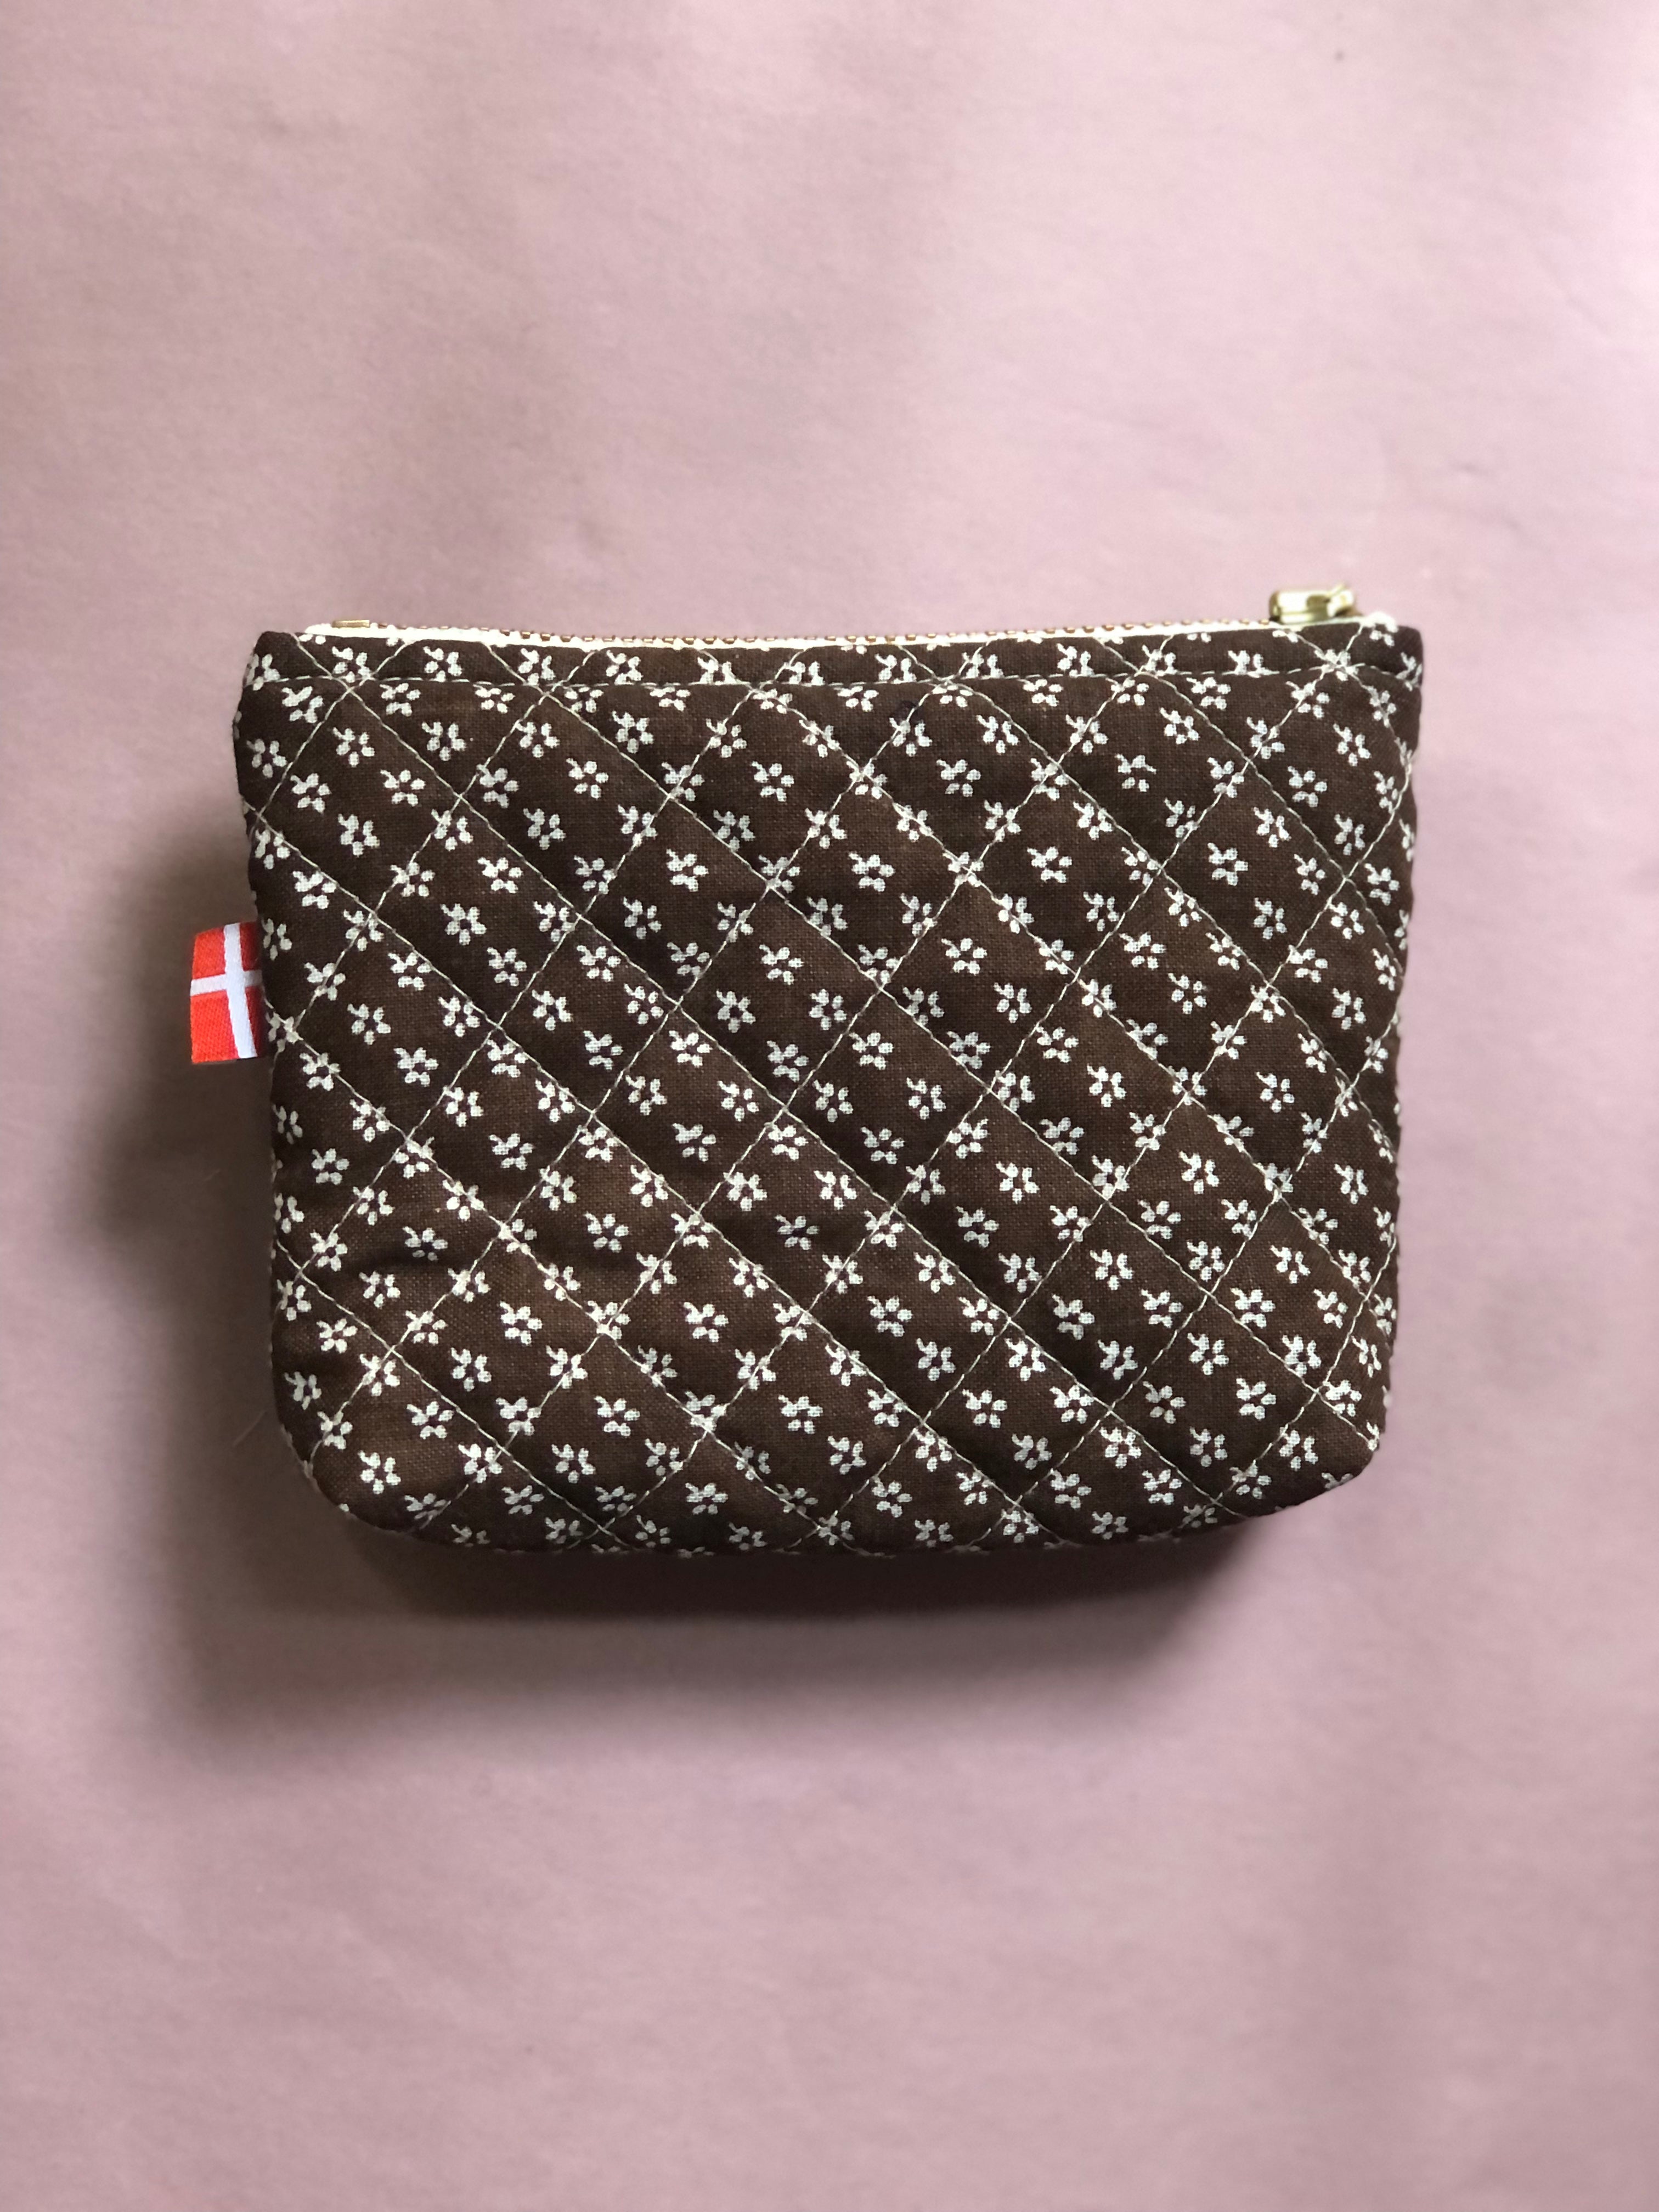 X-small pouch